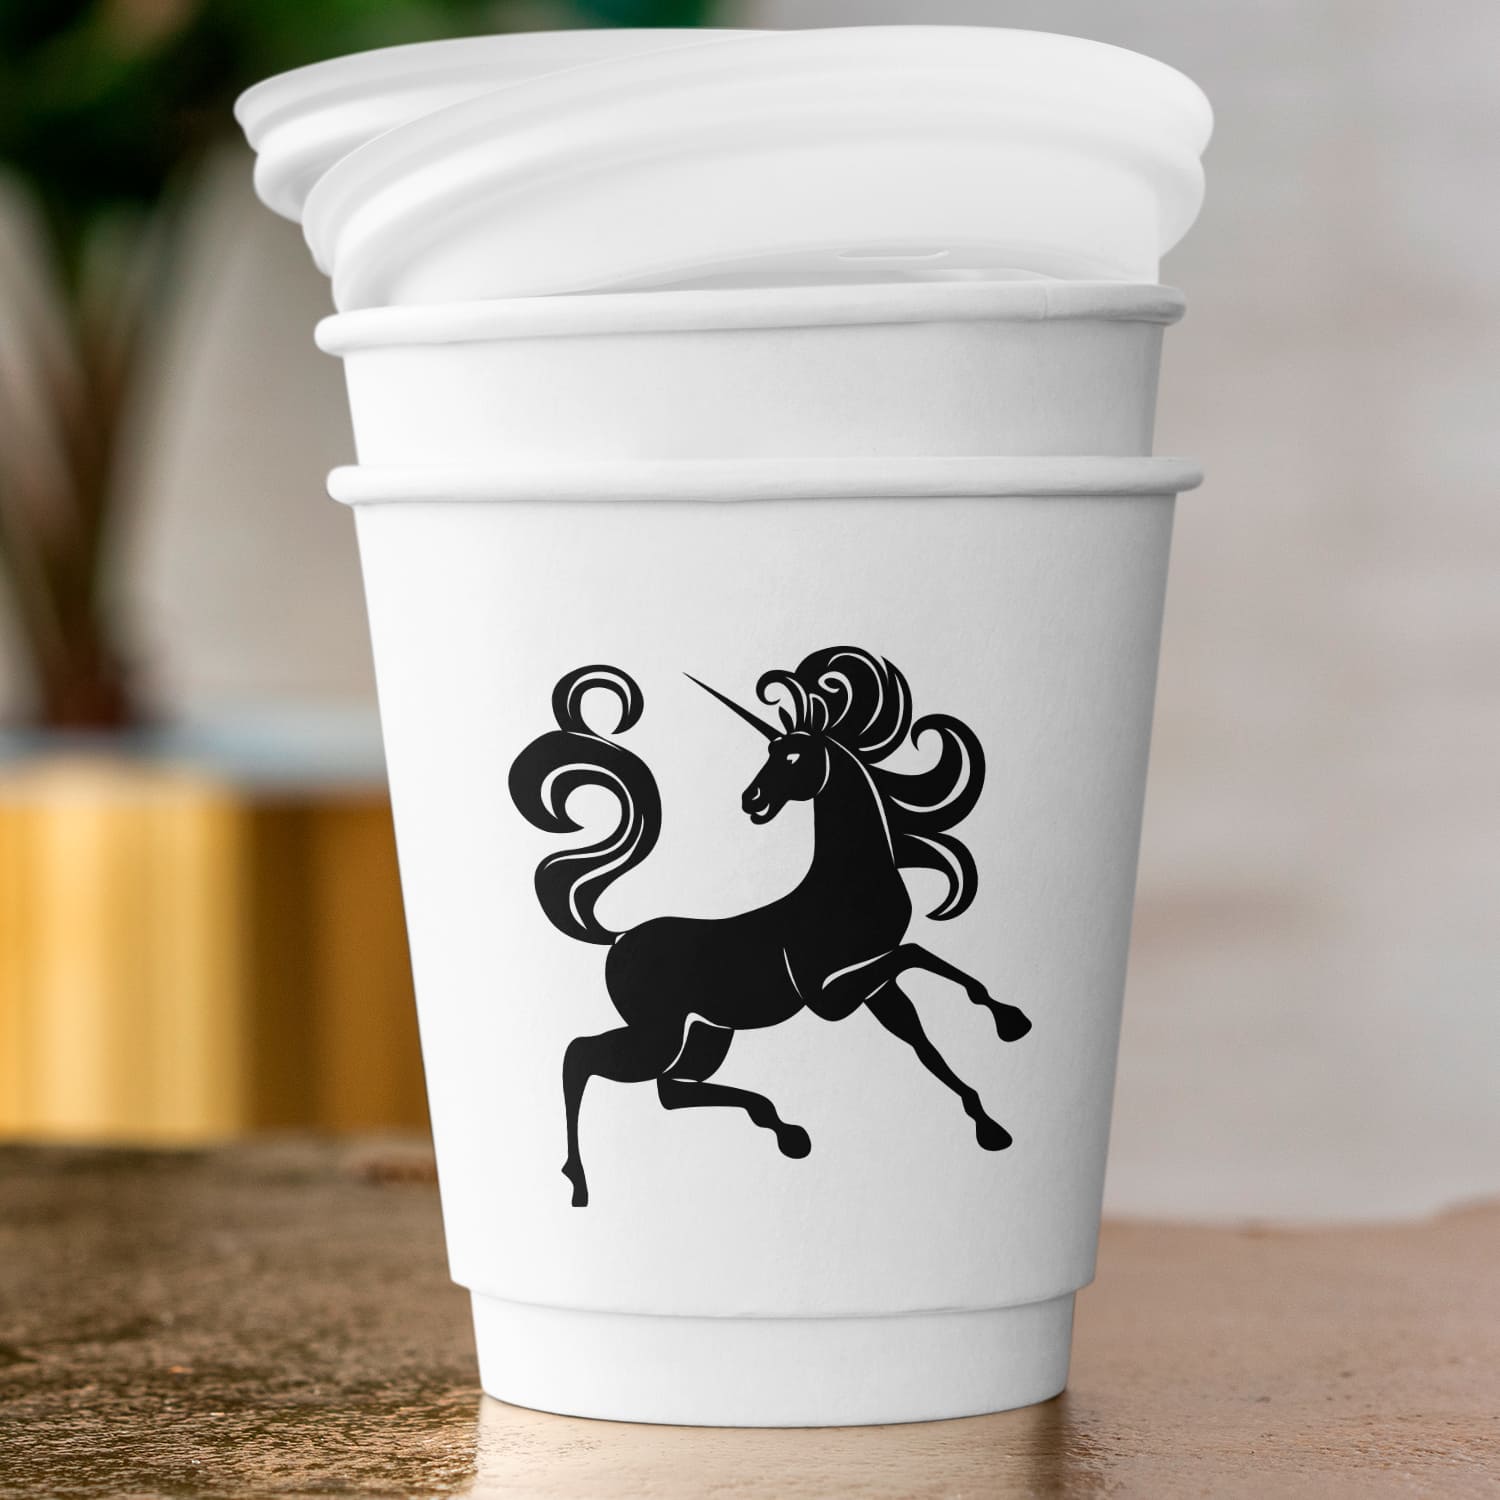 Silhouette Unicorn on the cup.